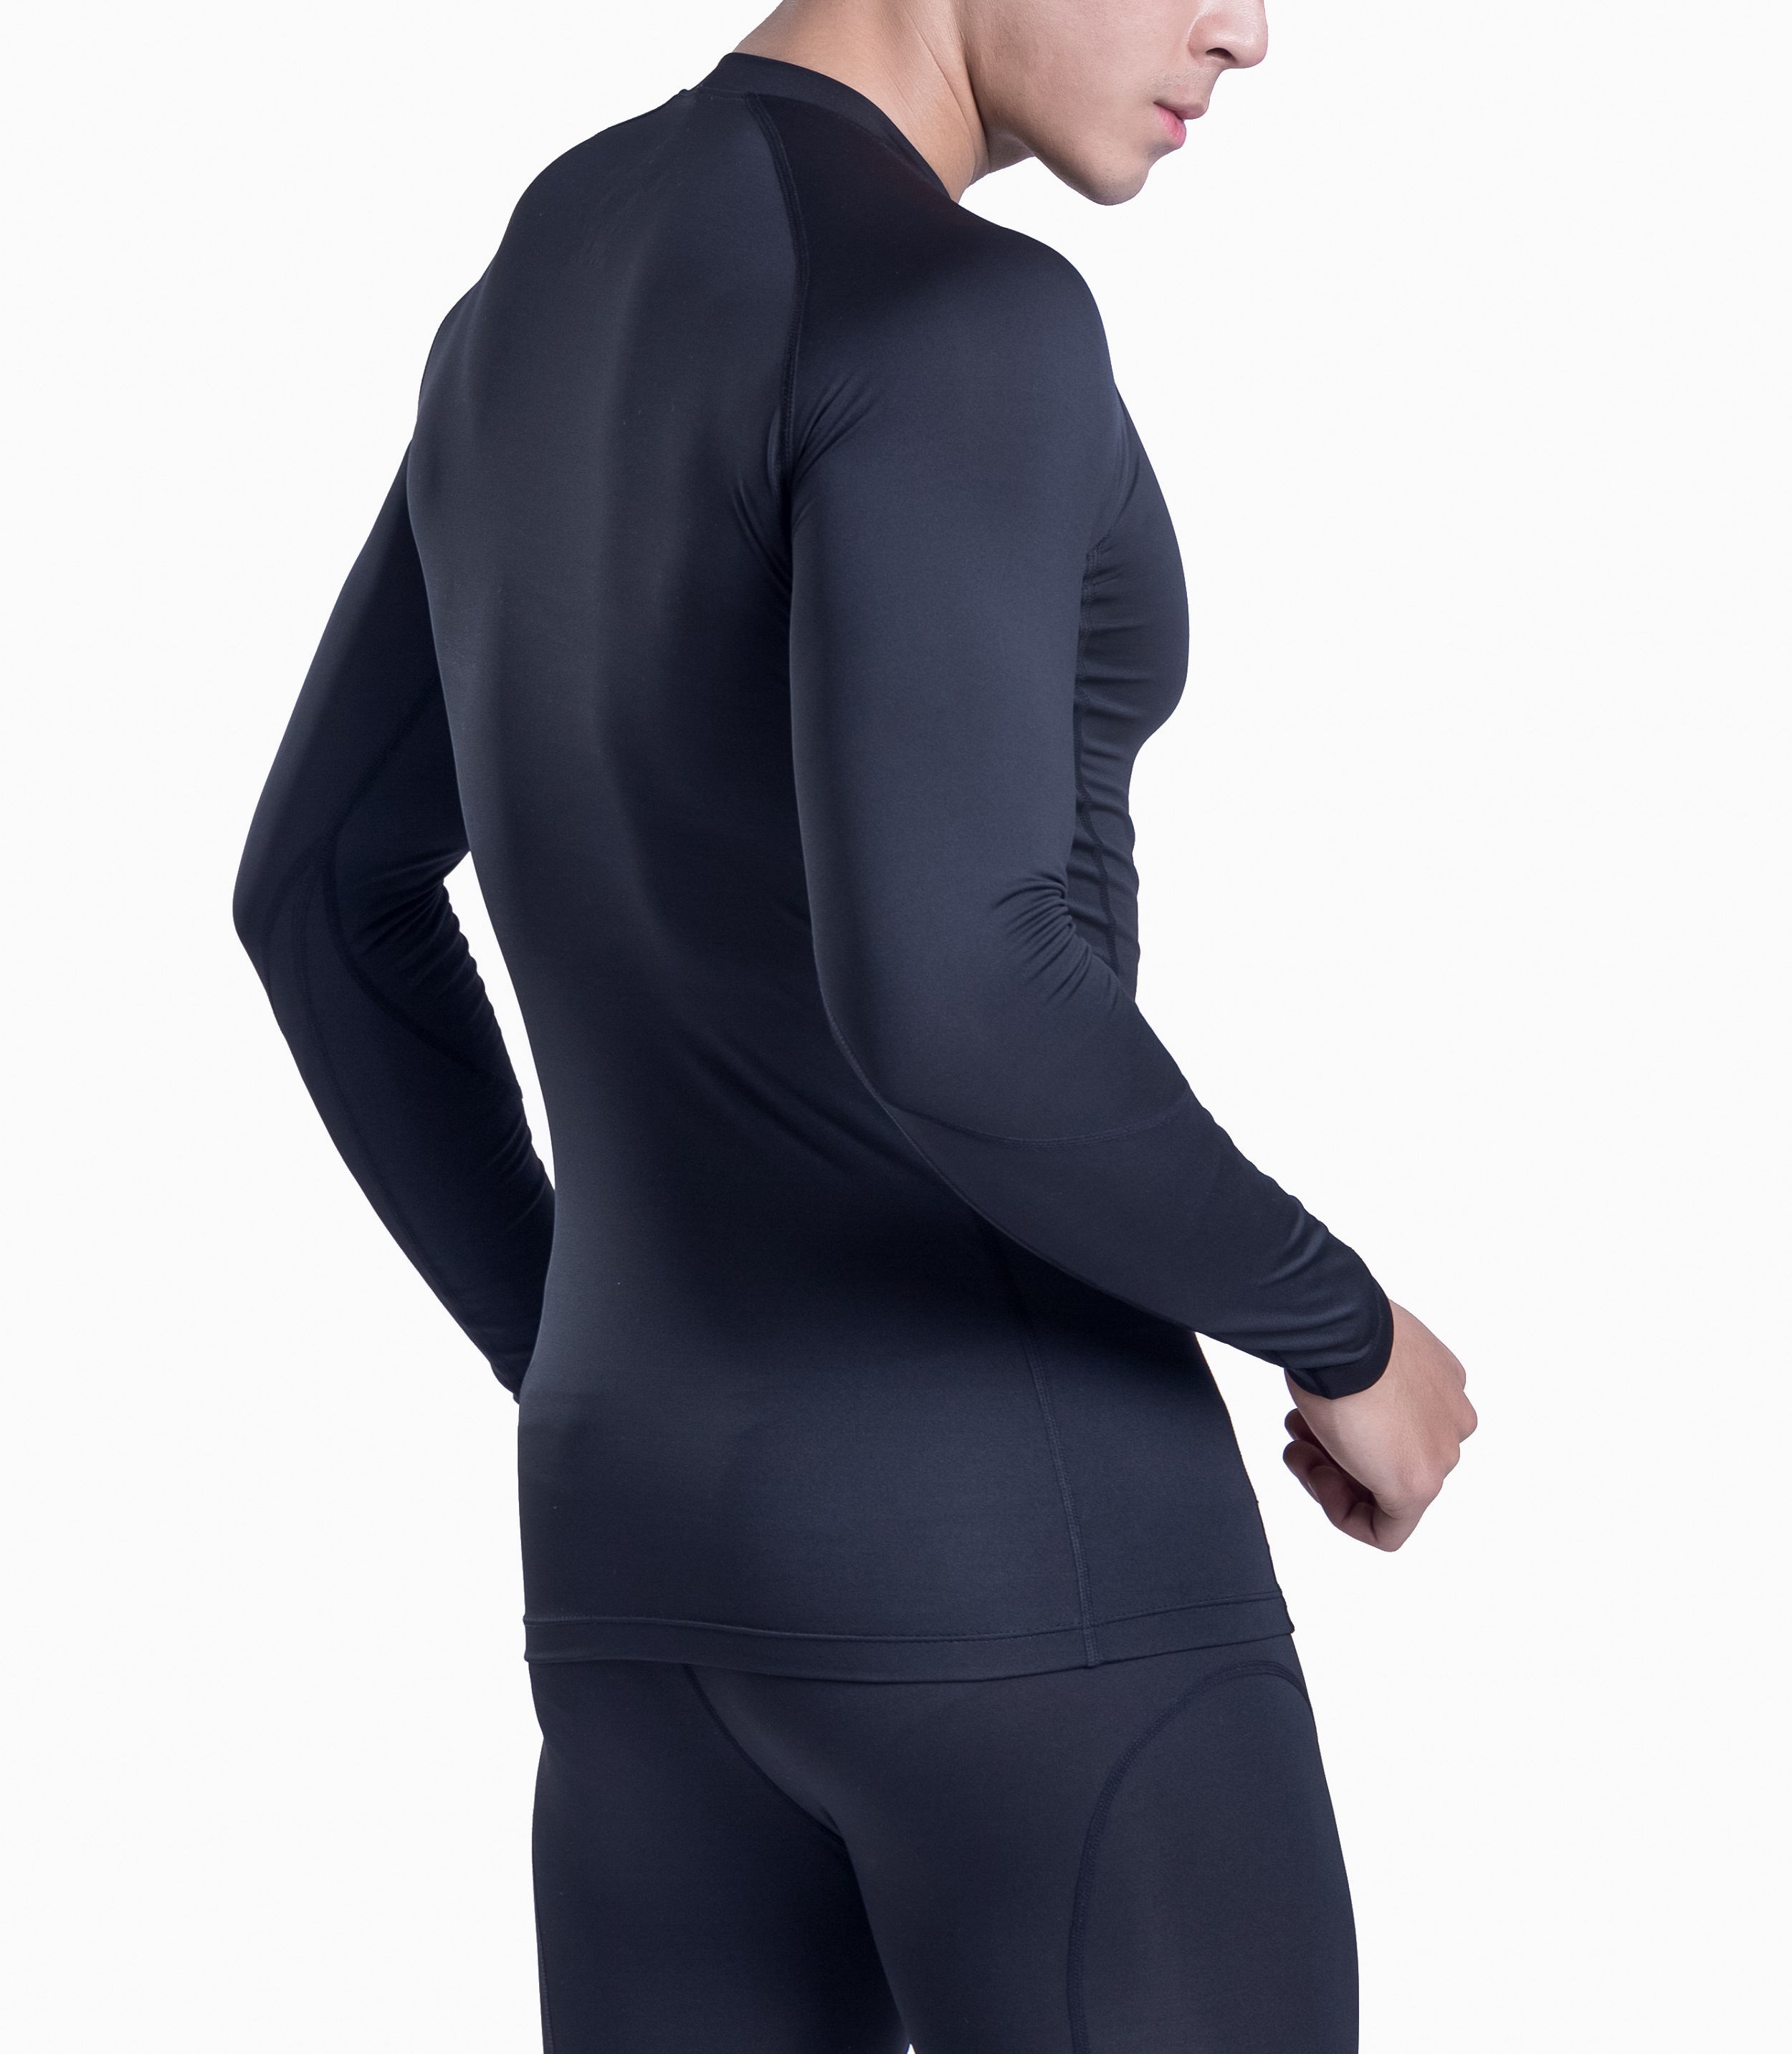 ACCIPIO]Short Sleeve Compression Shirt for Men Moisture Wicking Base Layer  Running Active Cool Dry Fitness Workout T-Shirt.